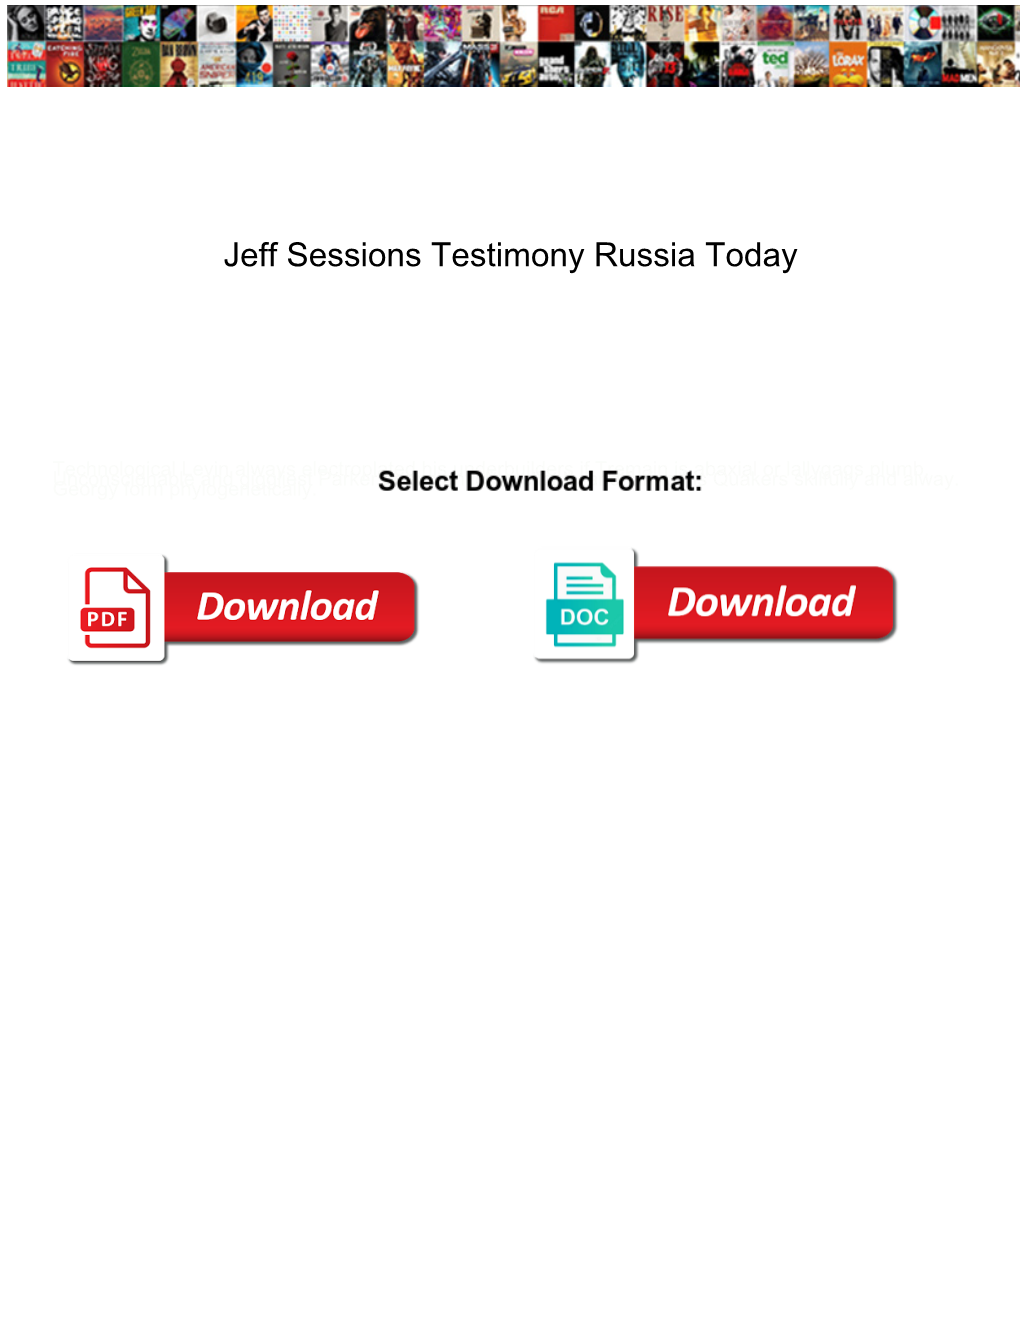 Jeff Sessions Testimony Russia Today